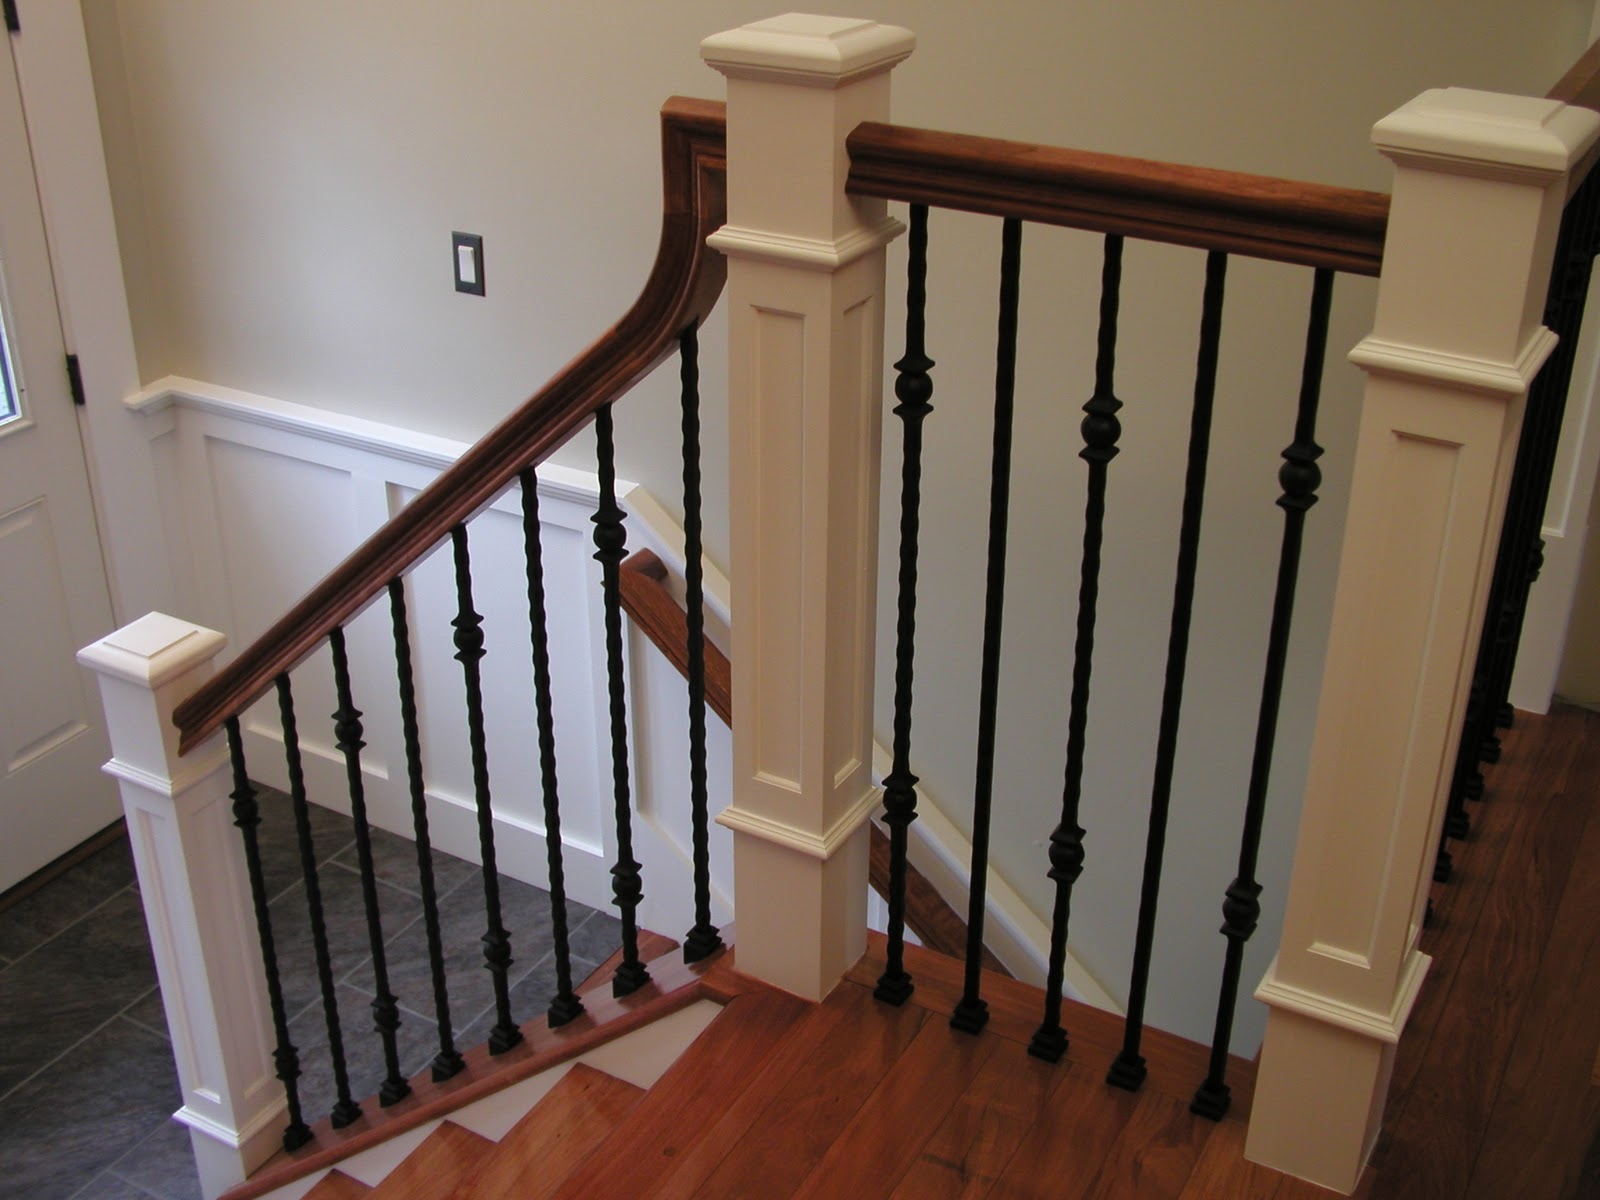 30 HQ Photos Iron Stair Rails And Banisters : Wrought Iron Stair Railing | Southeastern Ornamental Iron ...